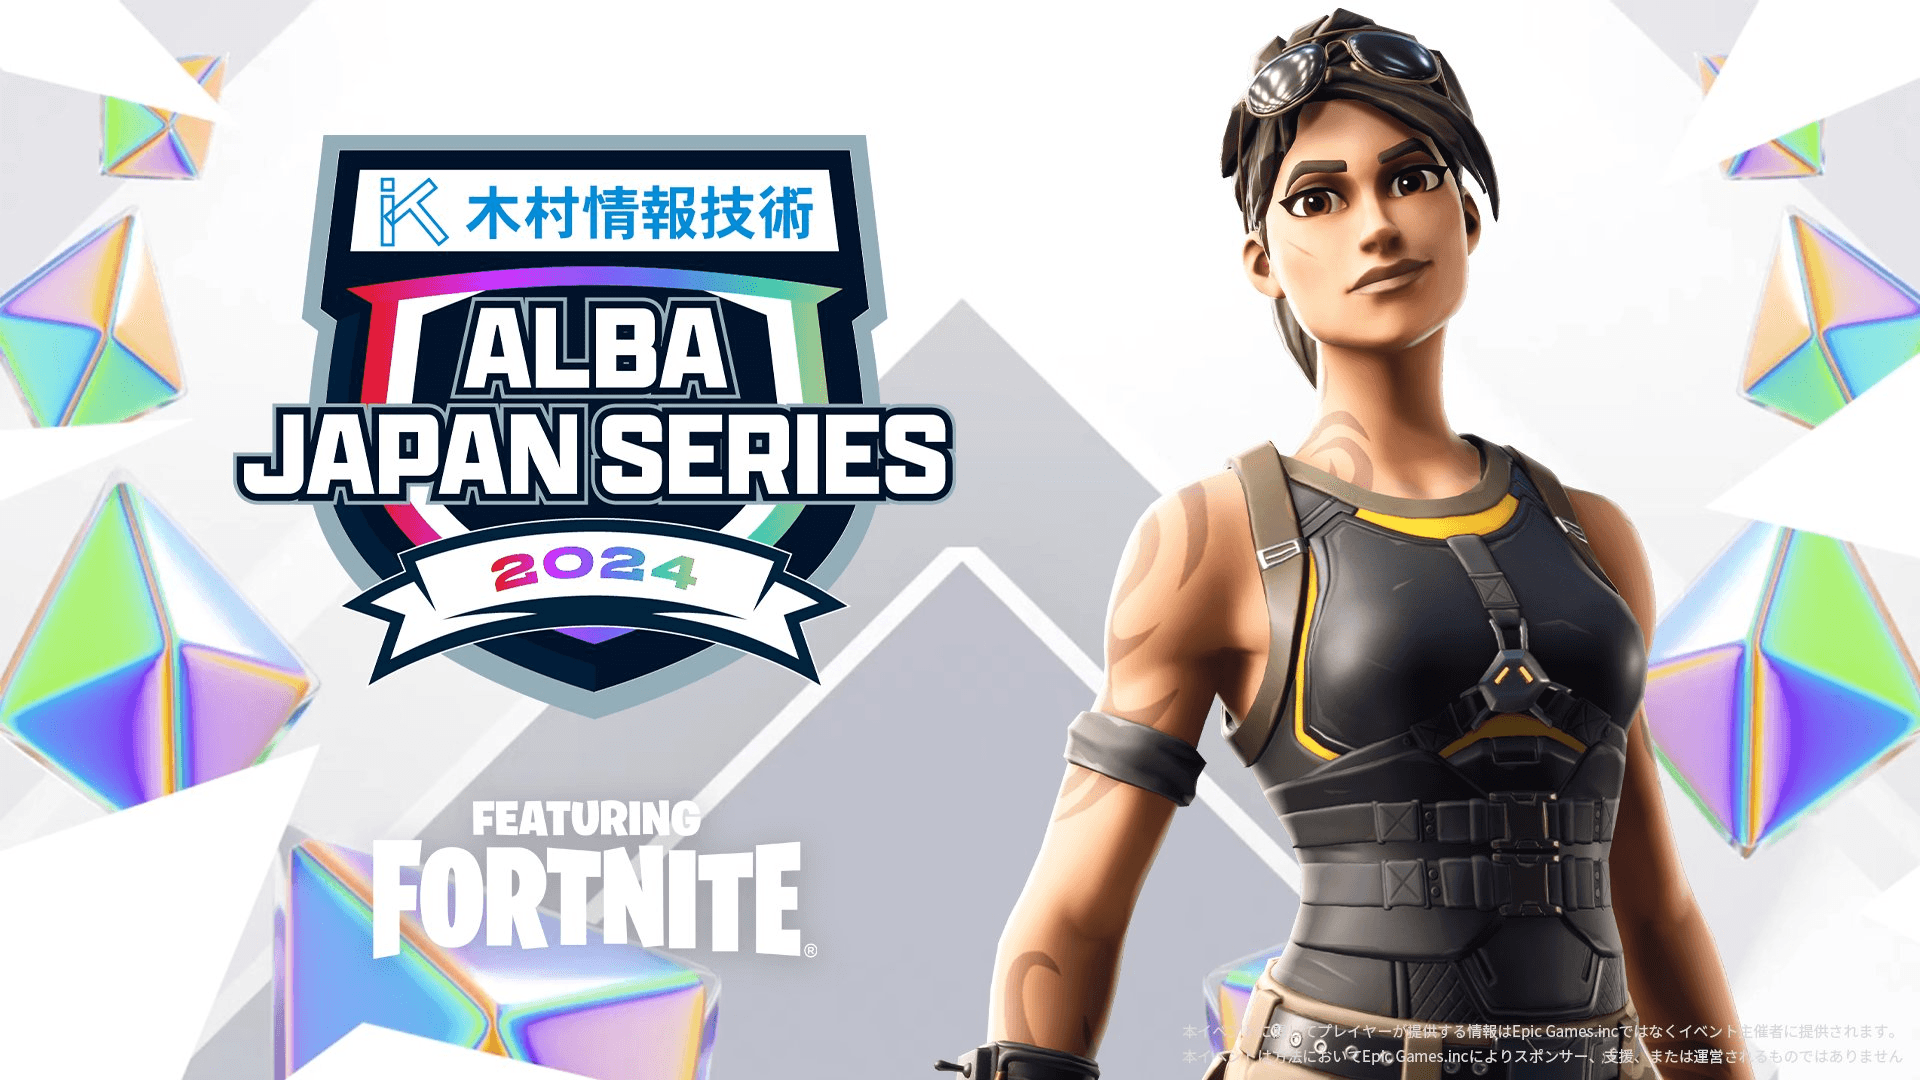 ALBA JAPAN SERIES featuring Fortnite #8 feature image